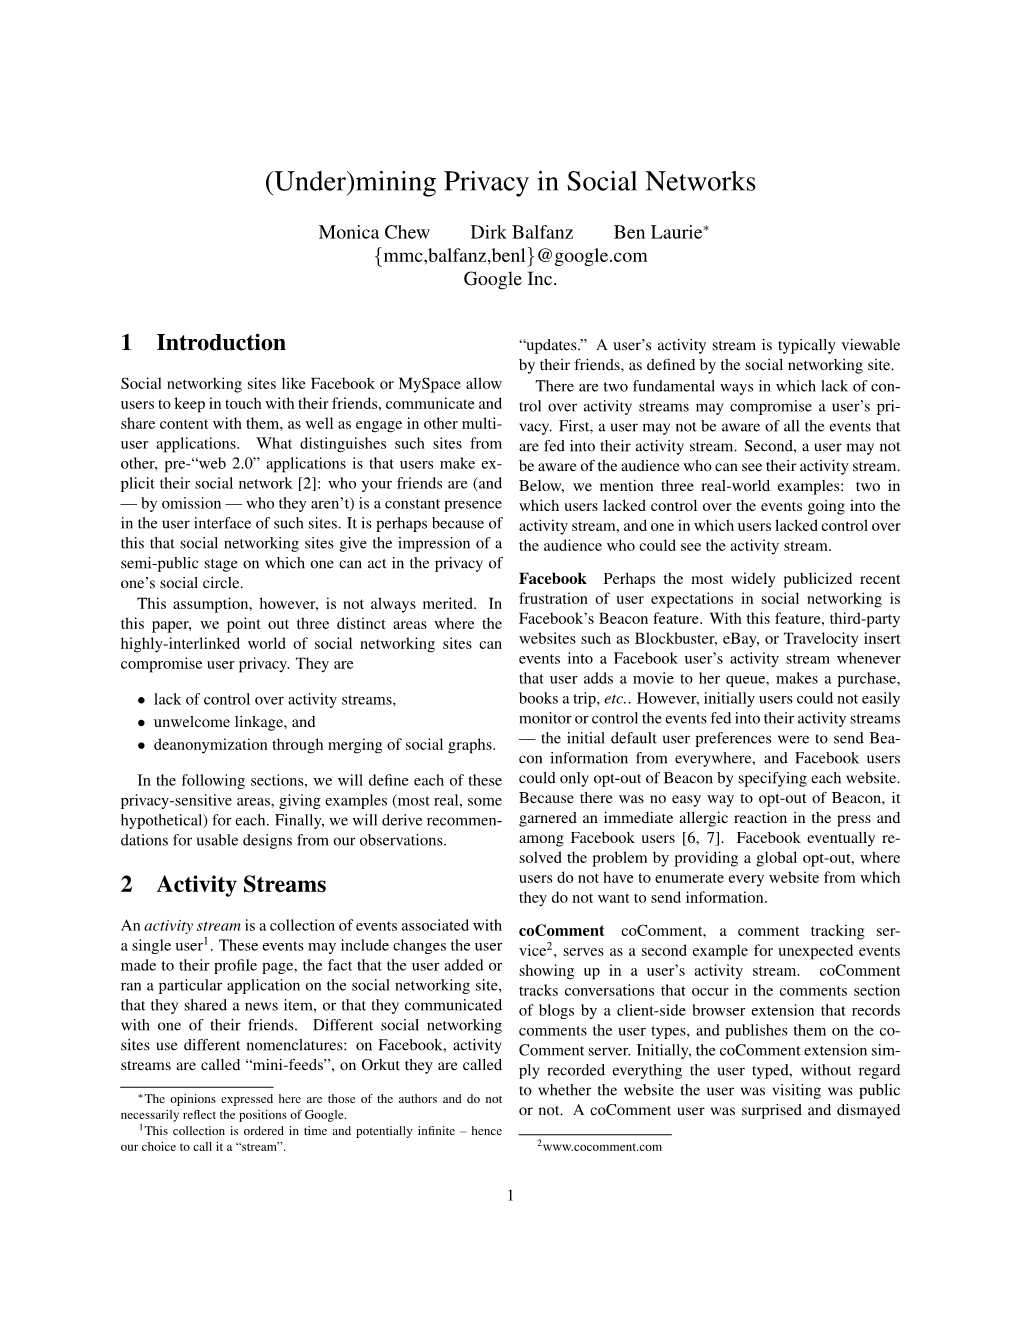 Mining Privacy in Social Networks